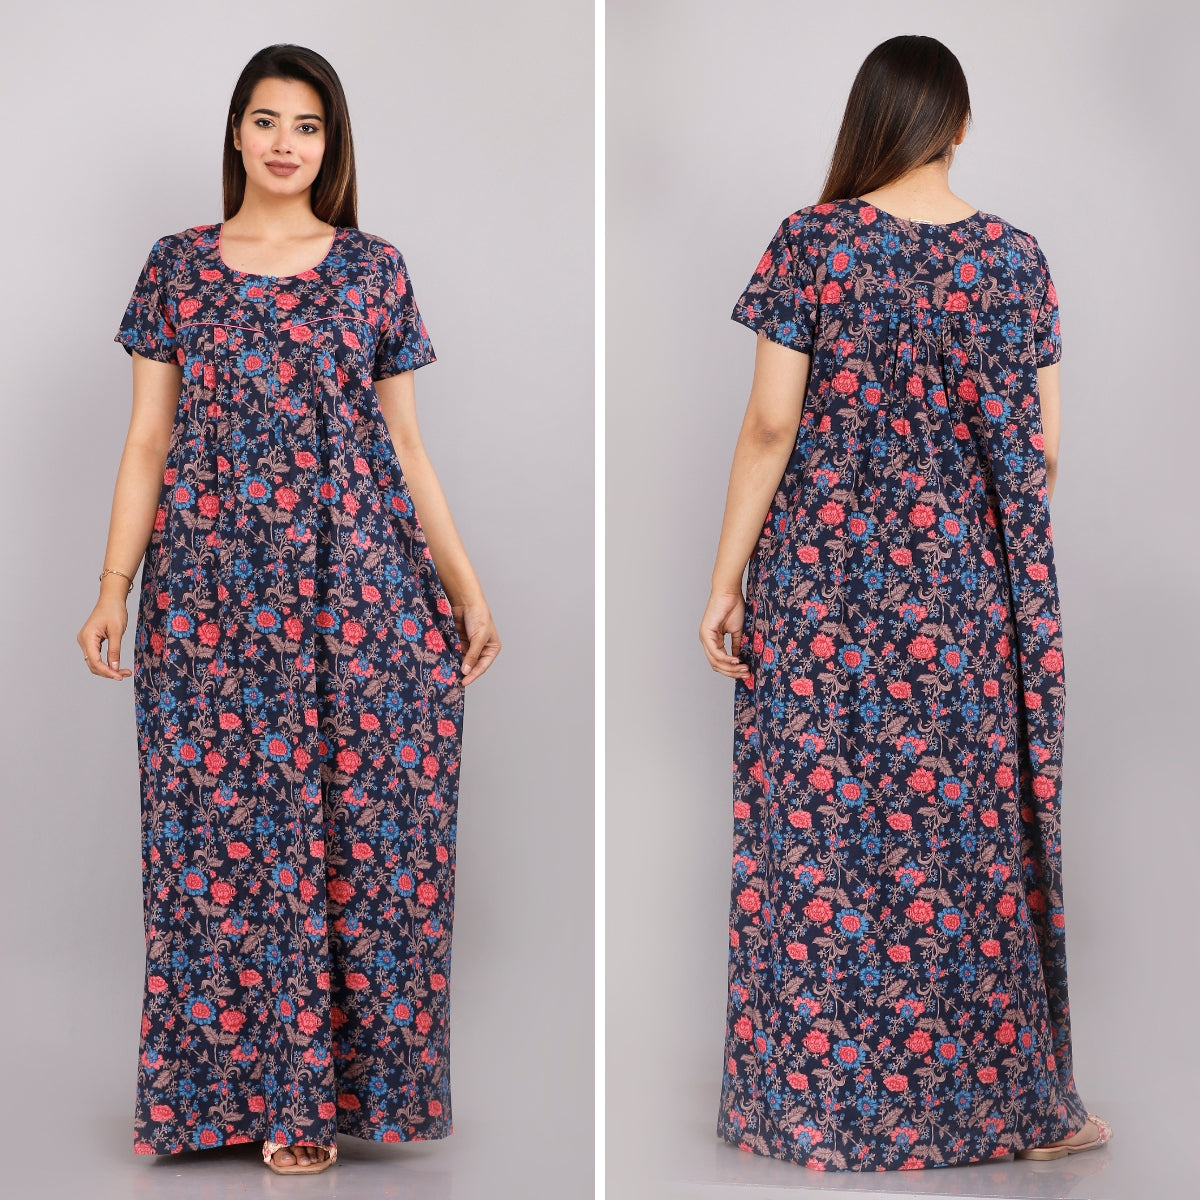 Eight Color Flower Navy Cotton Nightwear Gowns